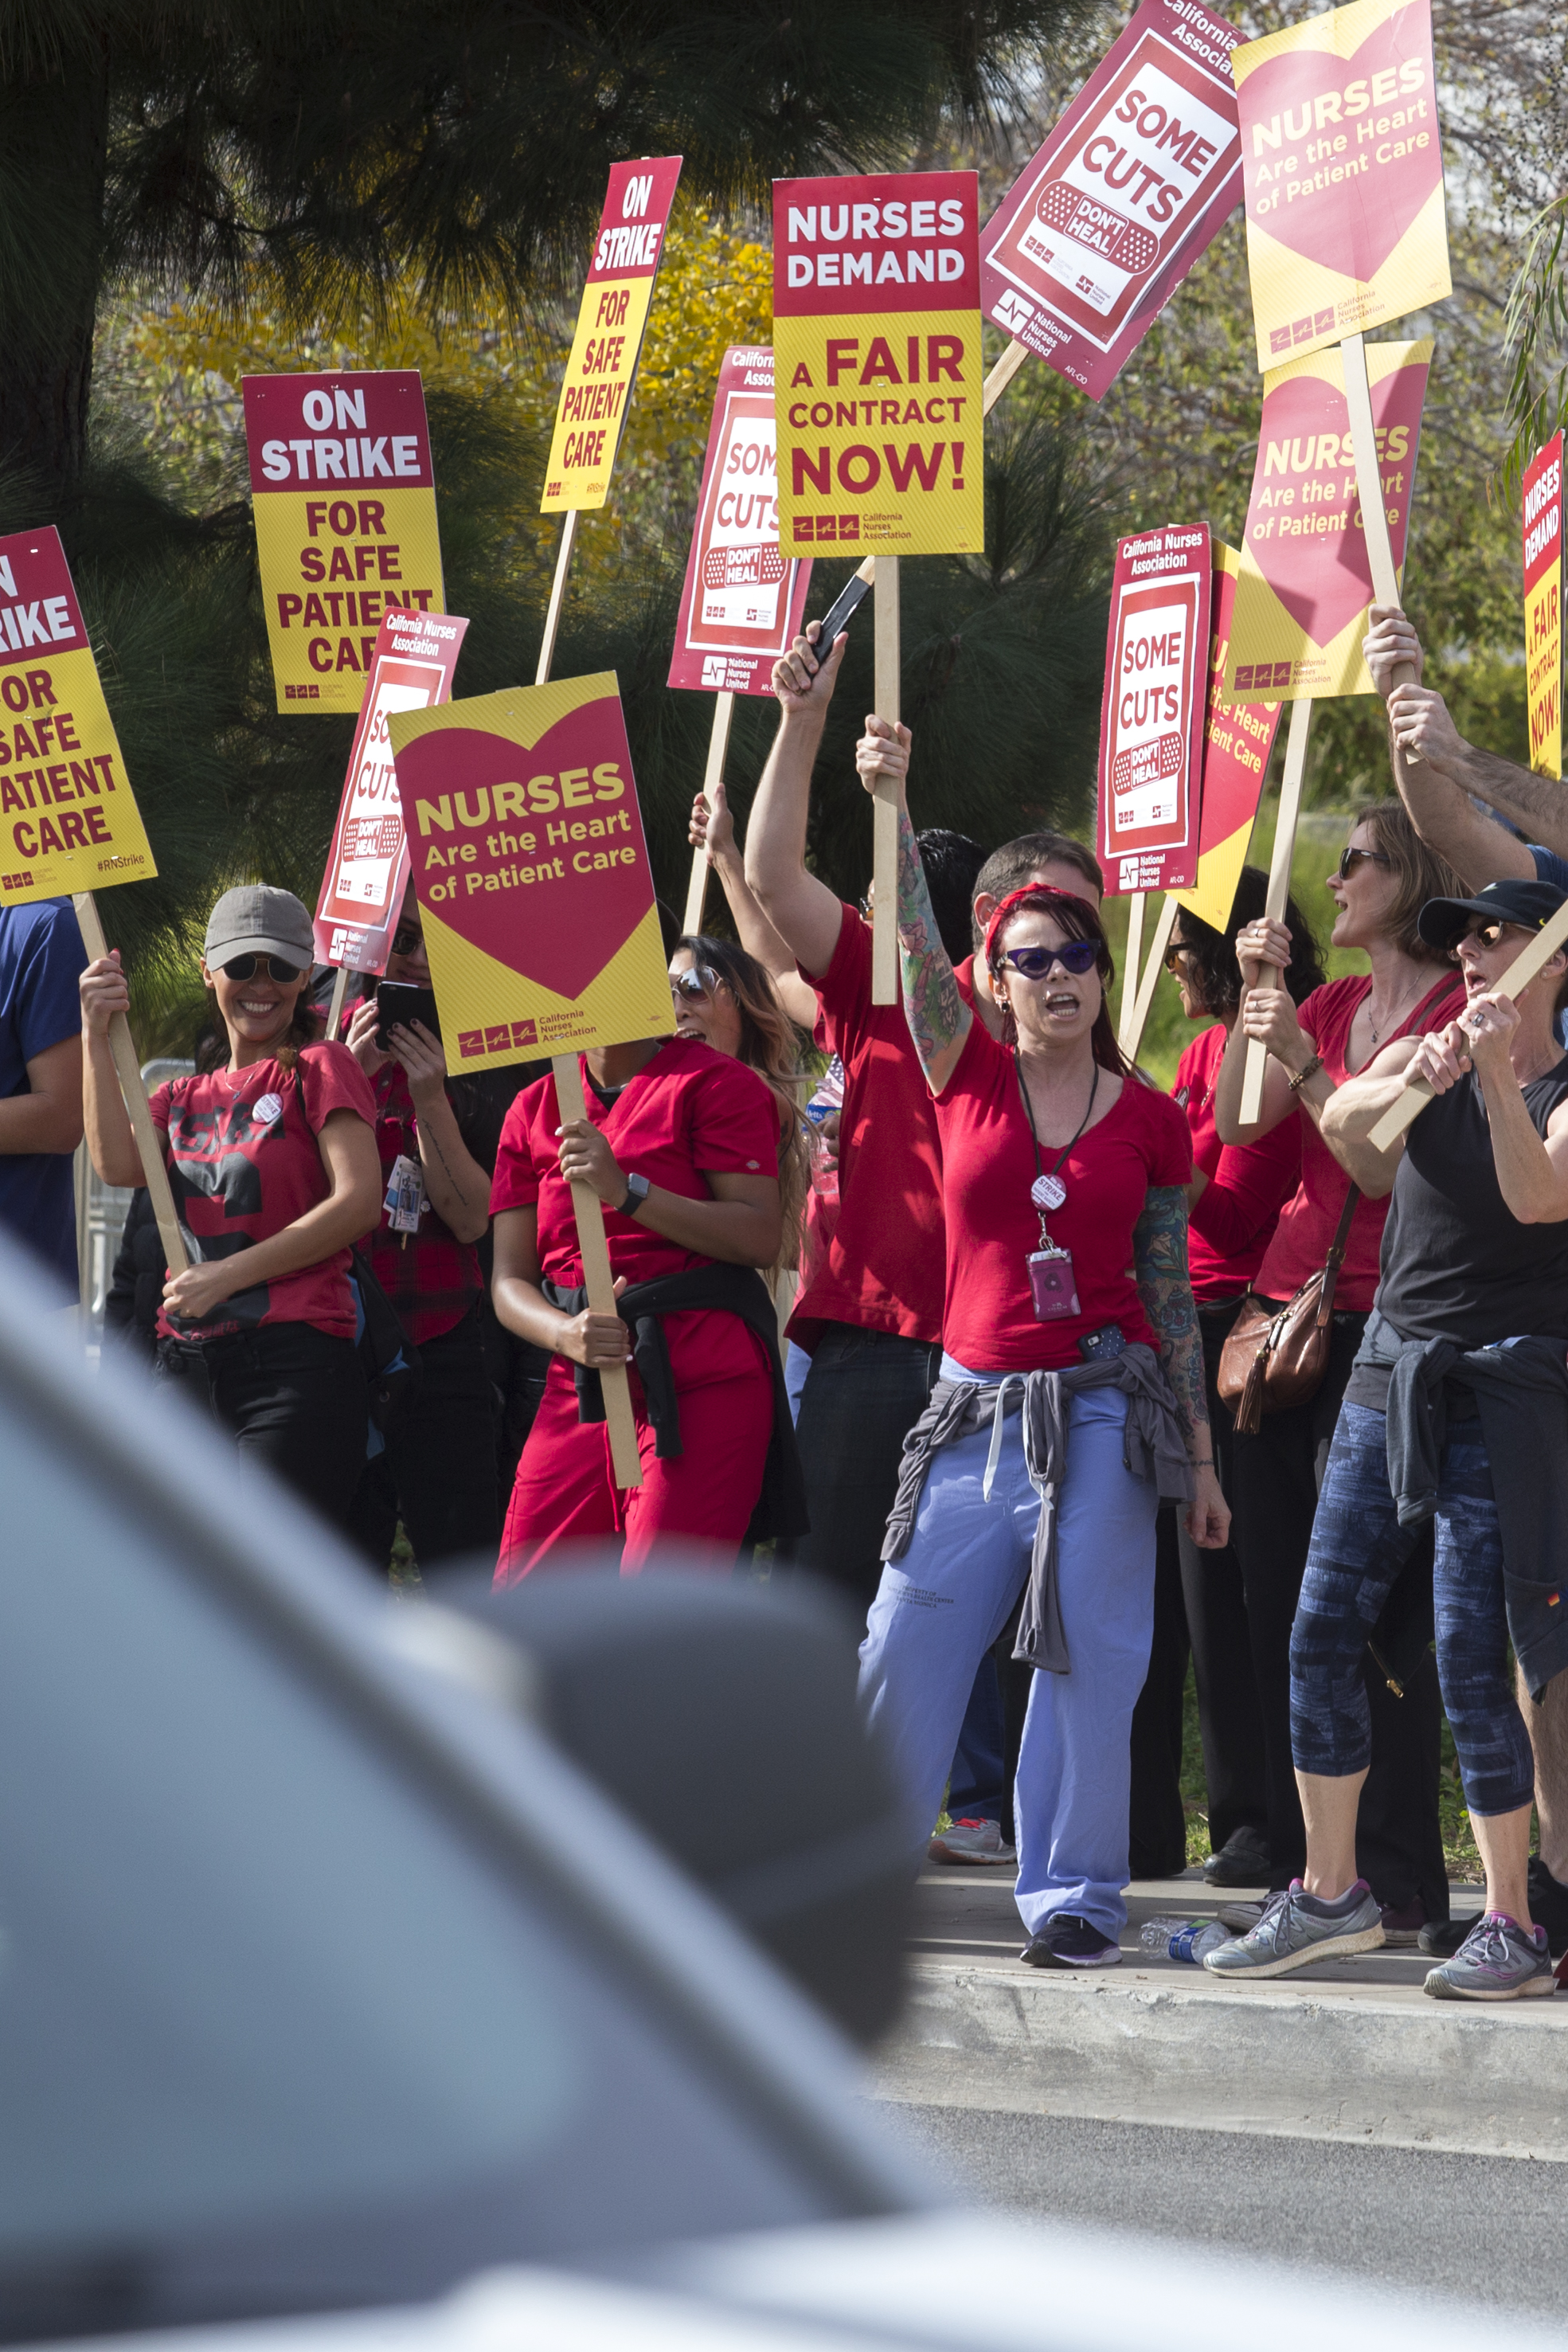  Members of the California Nurses Association protest at a Nurses Strike outside of Providence Saint Johns Health Center in Santa Monica, California on November 27, 2018. The nurses were striking over the unfair treatment they are receiving from Prov